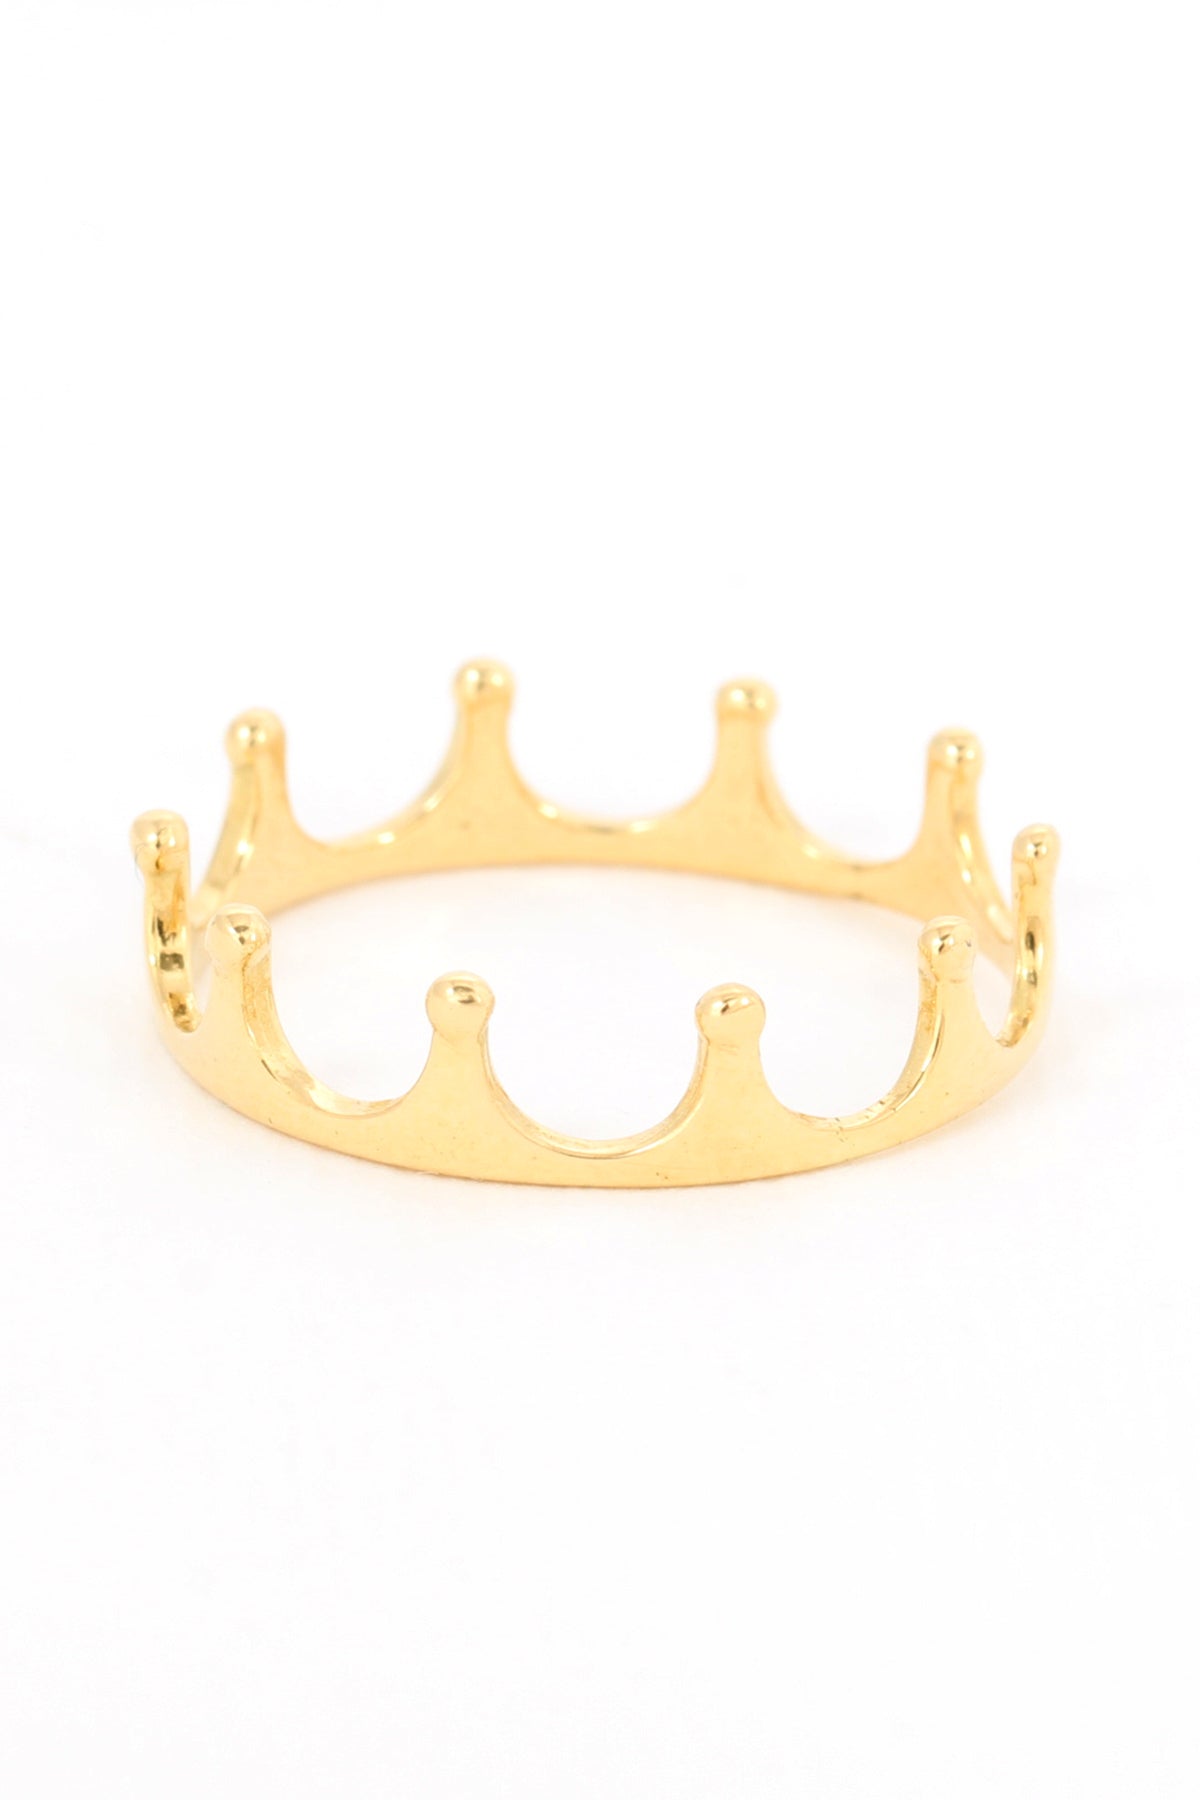 Crown Ring - ShopAuthentique